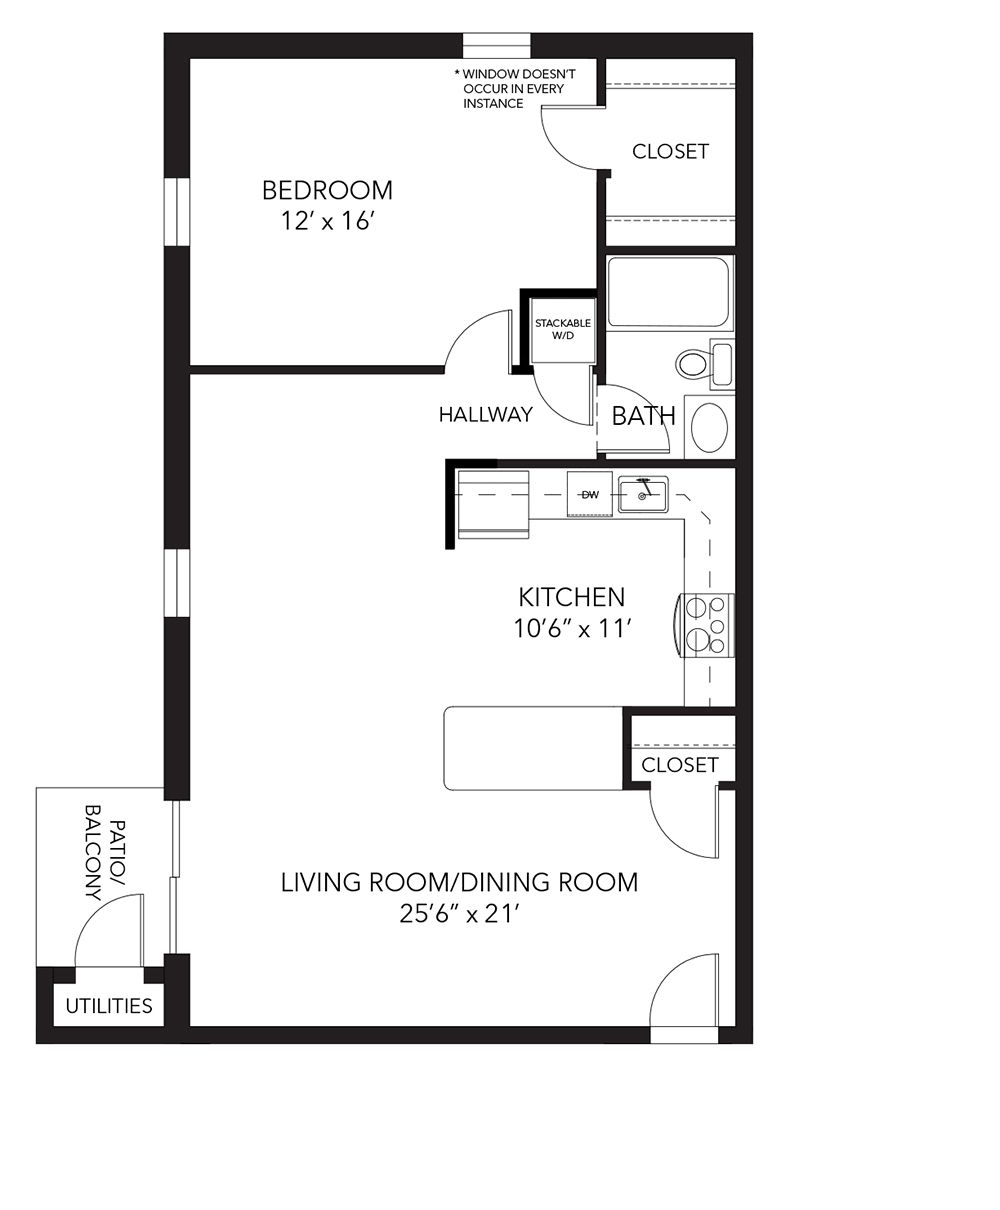 Floor Plans of Corner Park Apartments in West Chester, PA